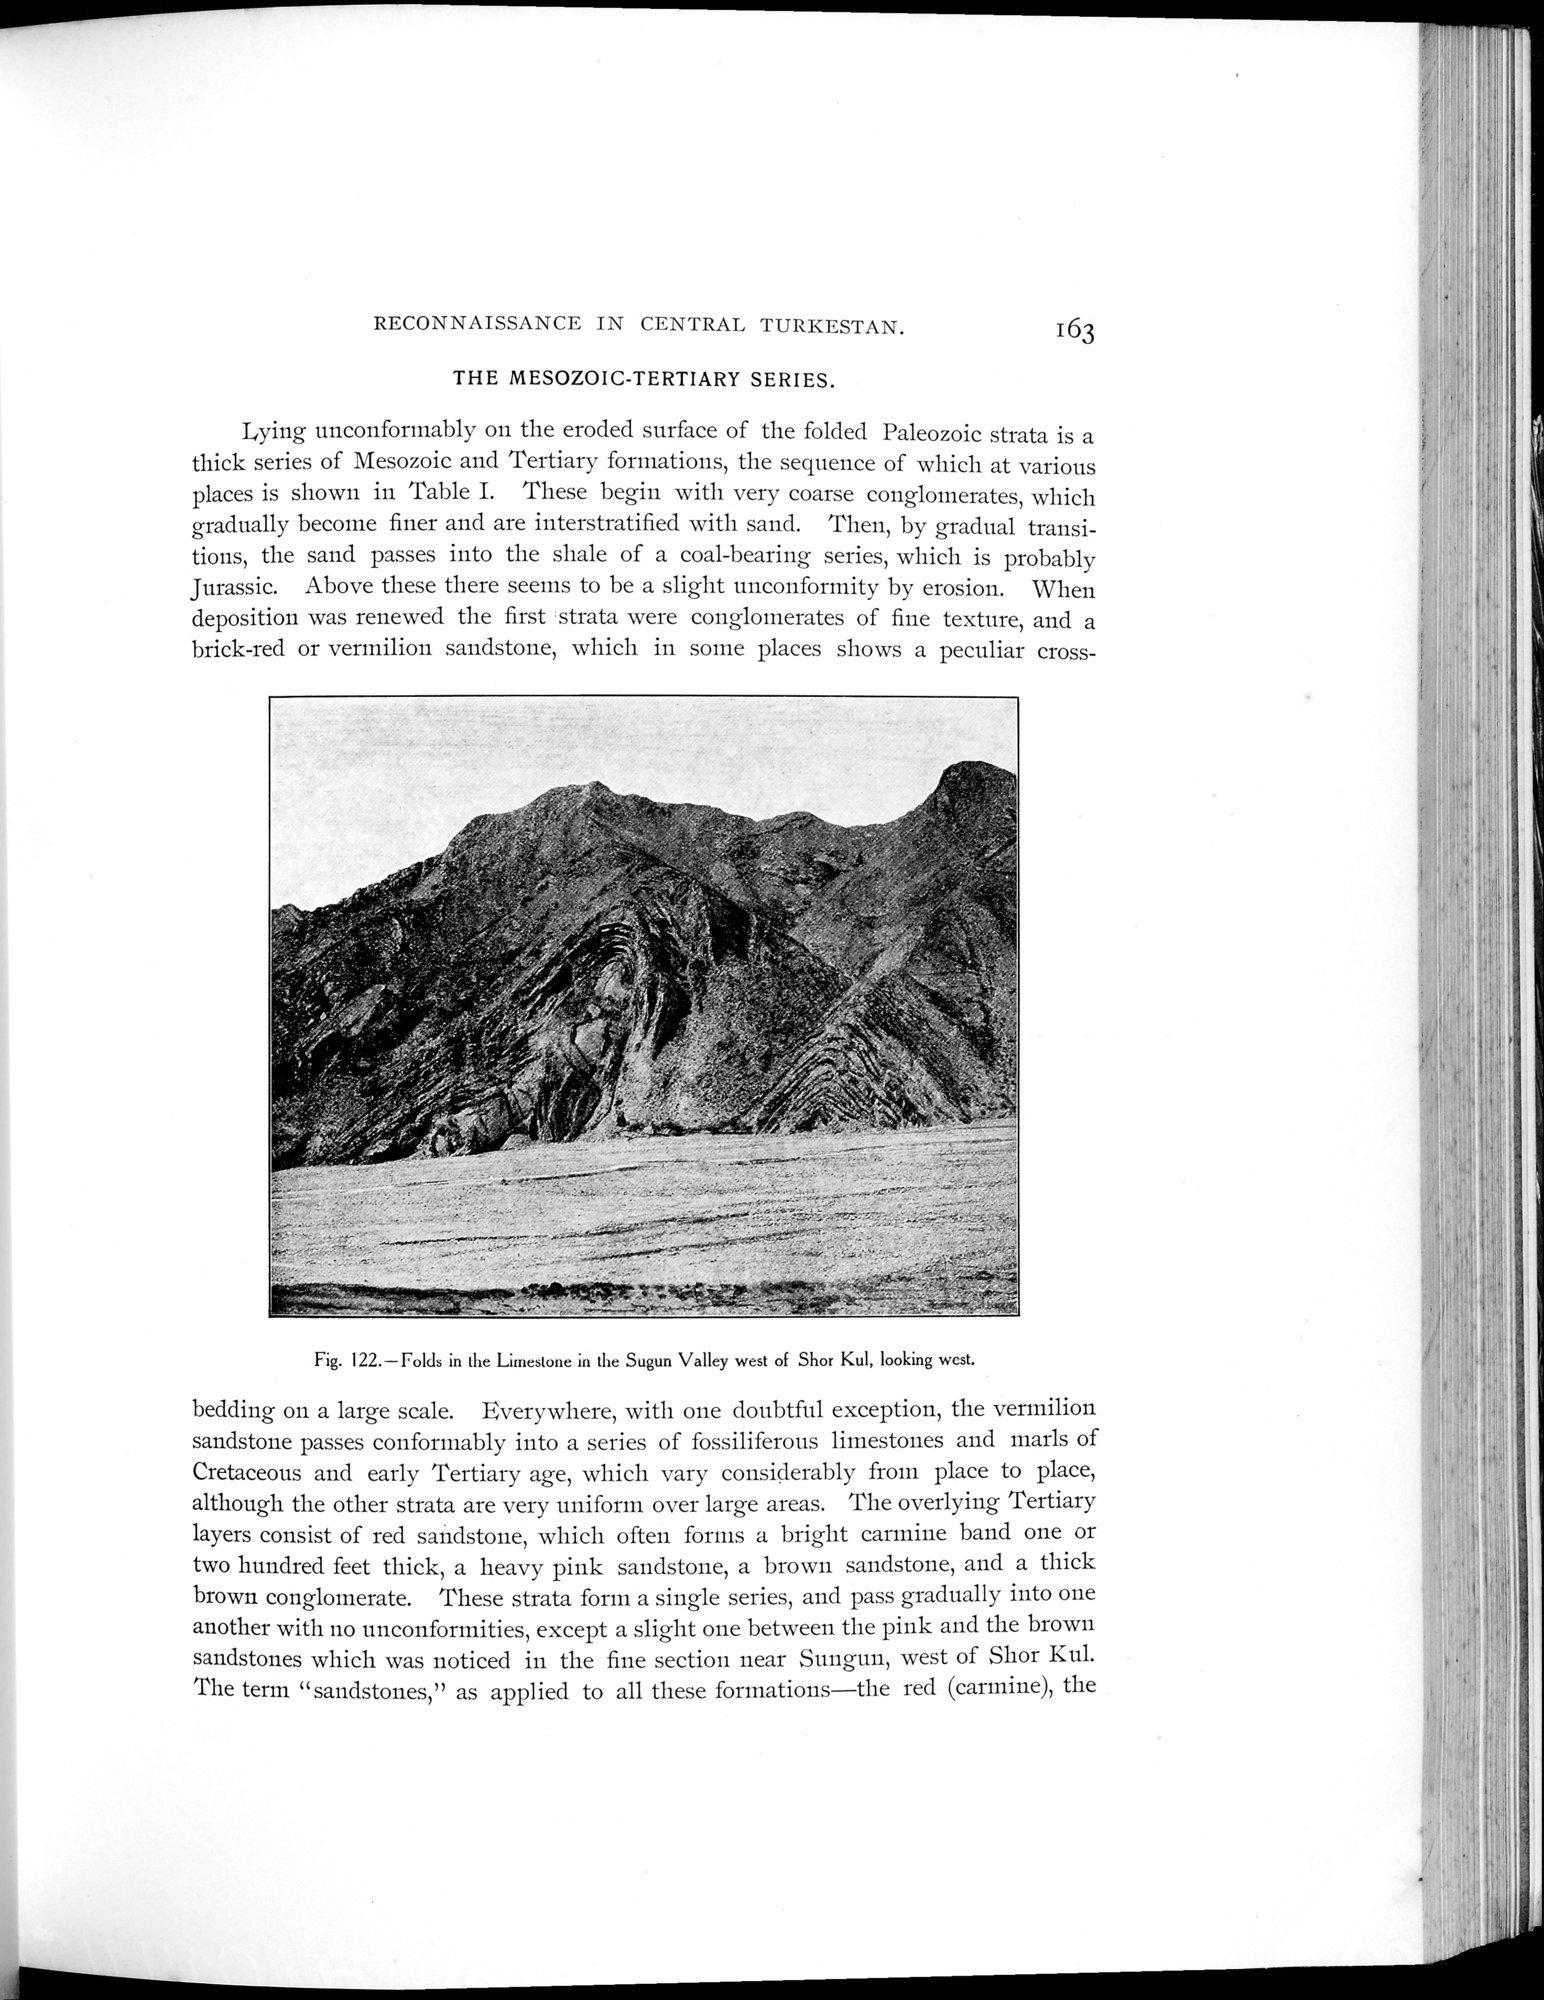 Explorations in Turkestan 1903 : vol.1 / Page 193 (Grayscale High Resolution Image)